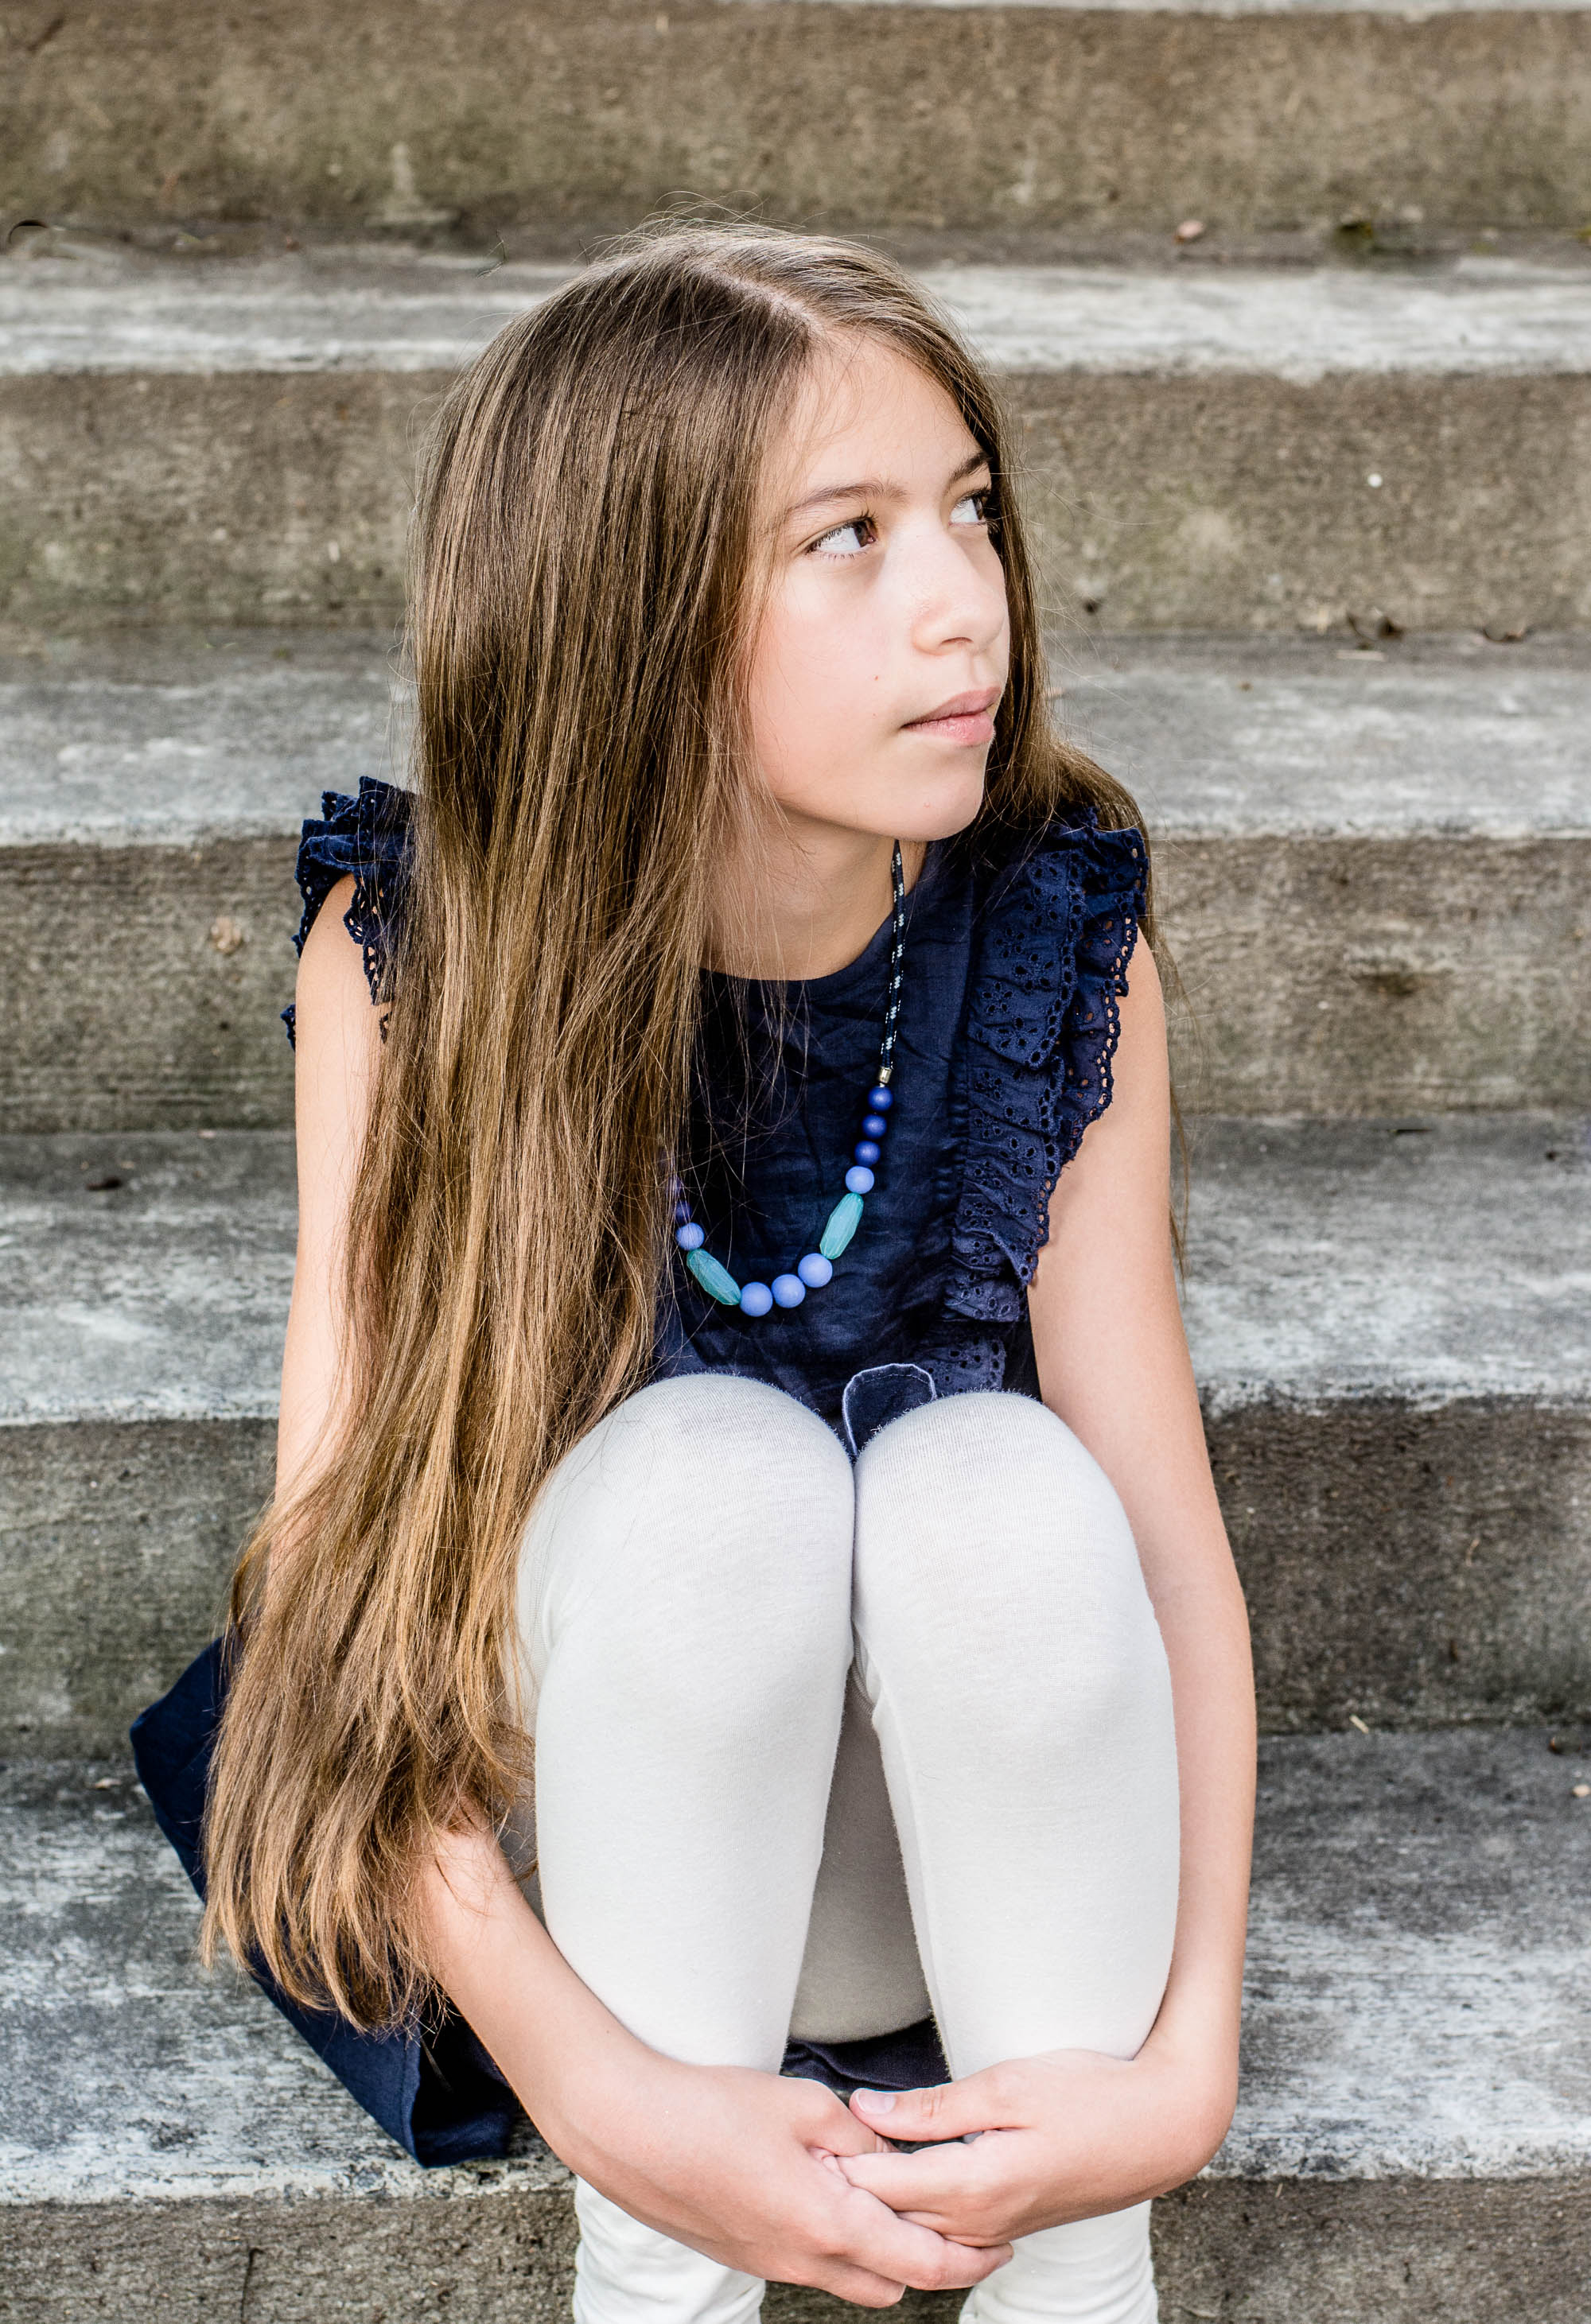 Back to School Clothes Shopping on a Budget with OshKosh B'Gosh